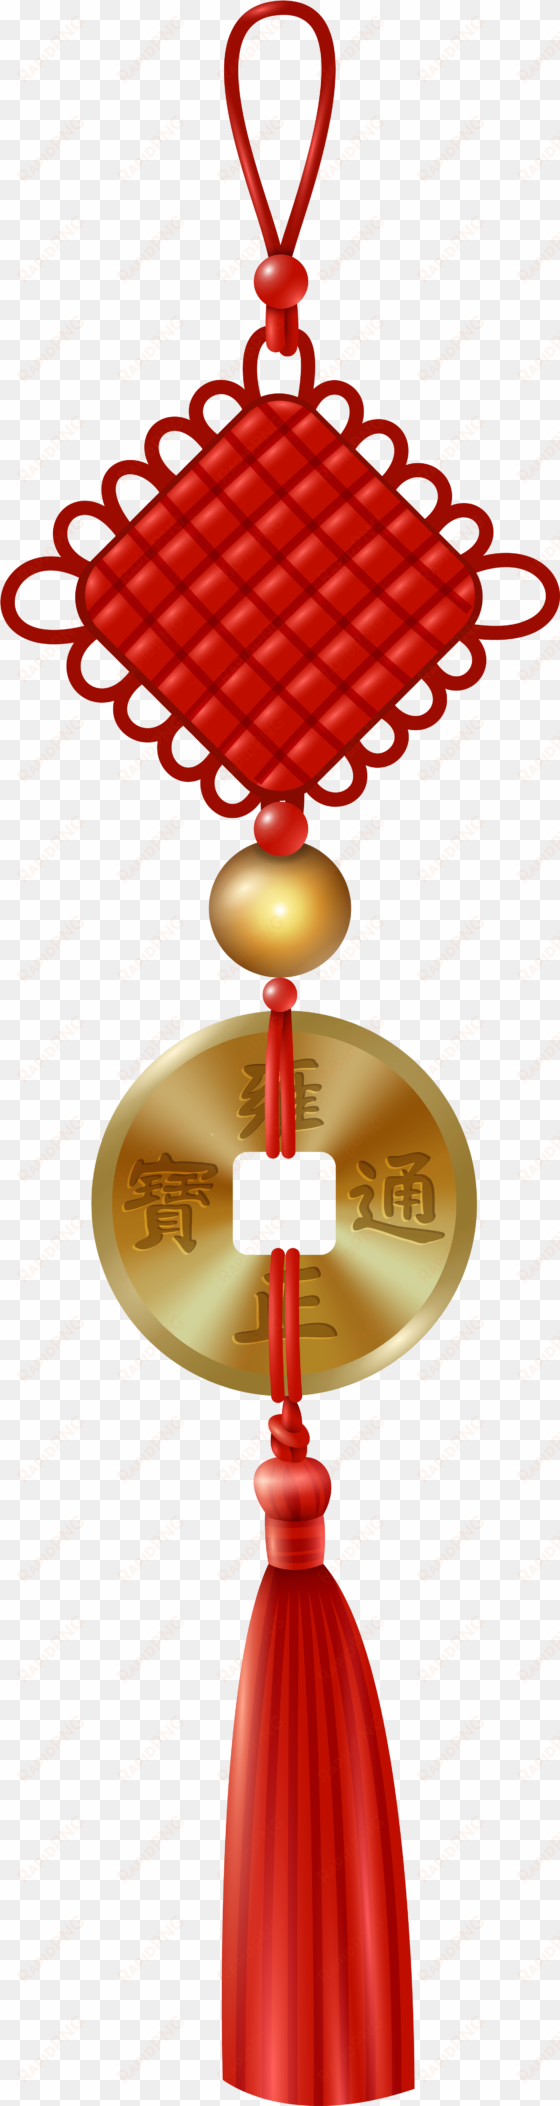 Chinese Hanging Decor Png Clip Art - Chinese Hanging Ornaments Png transparent png image